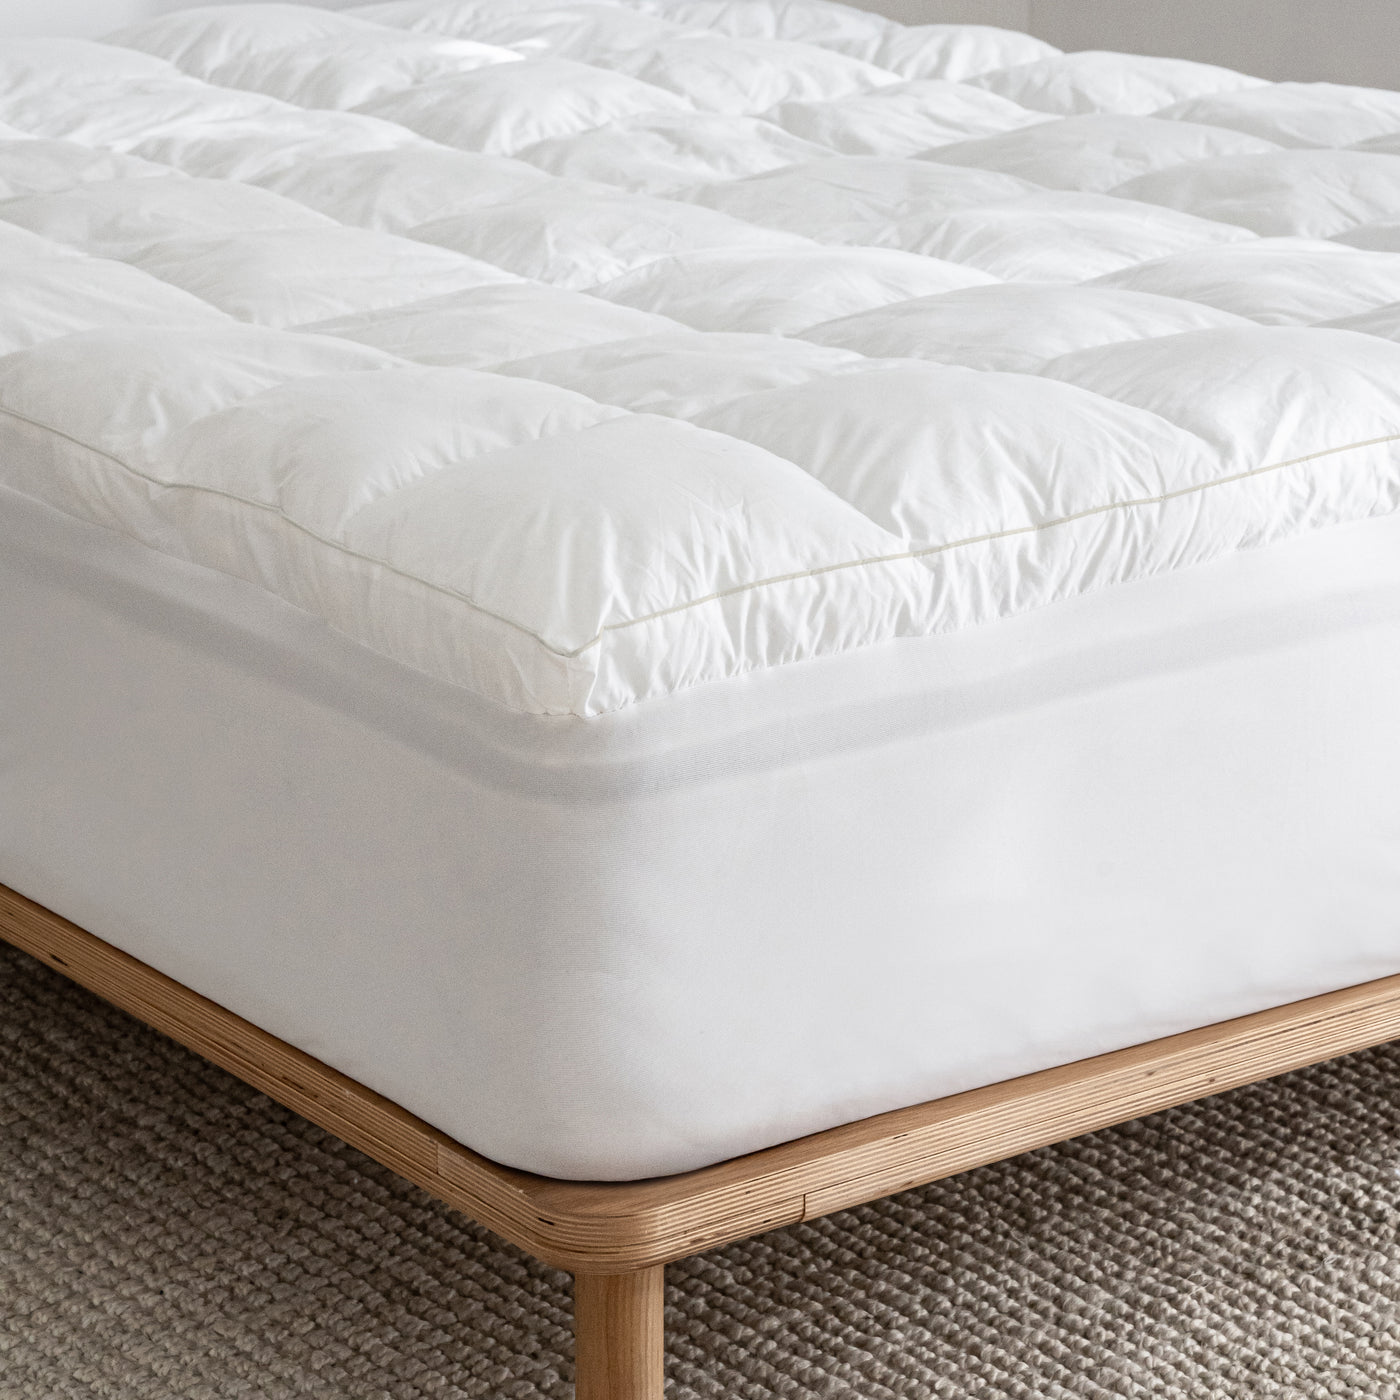 Hotel Cloud Collection™ Luxury 5 Star Hotel Mattress Topper